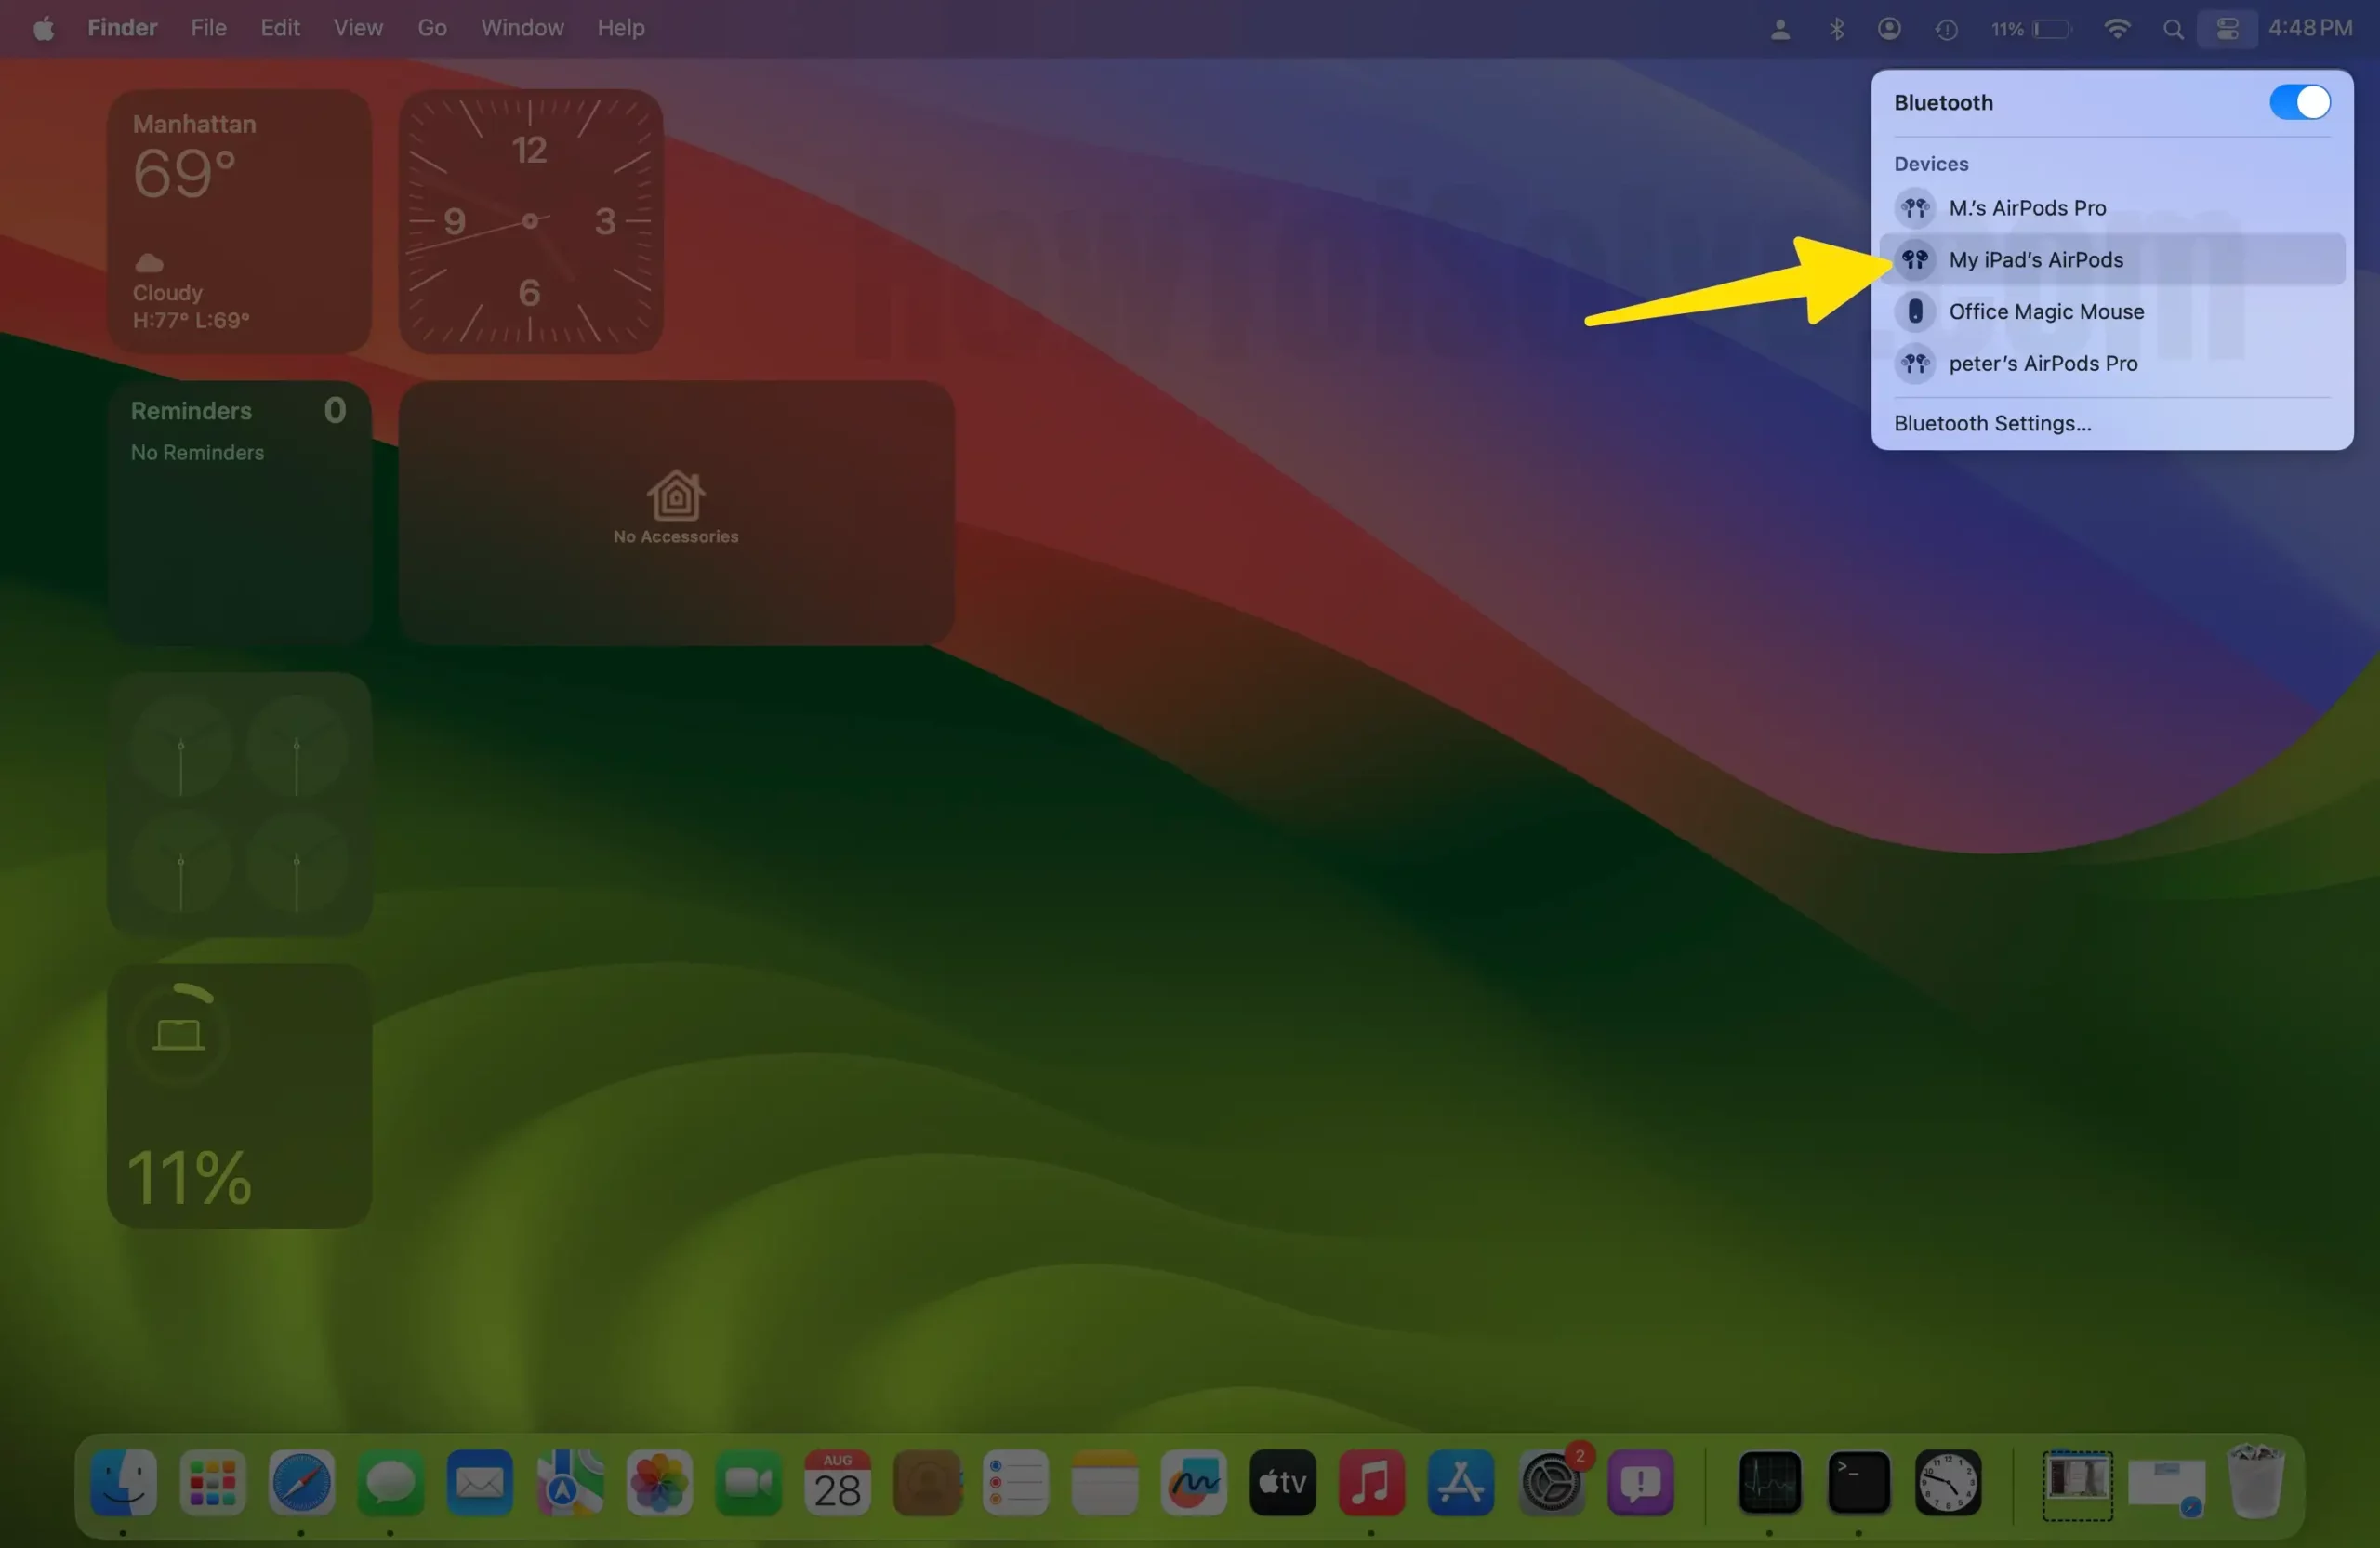 Connect AirPods to Mac from Control Center